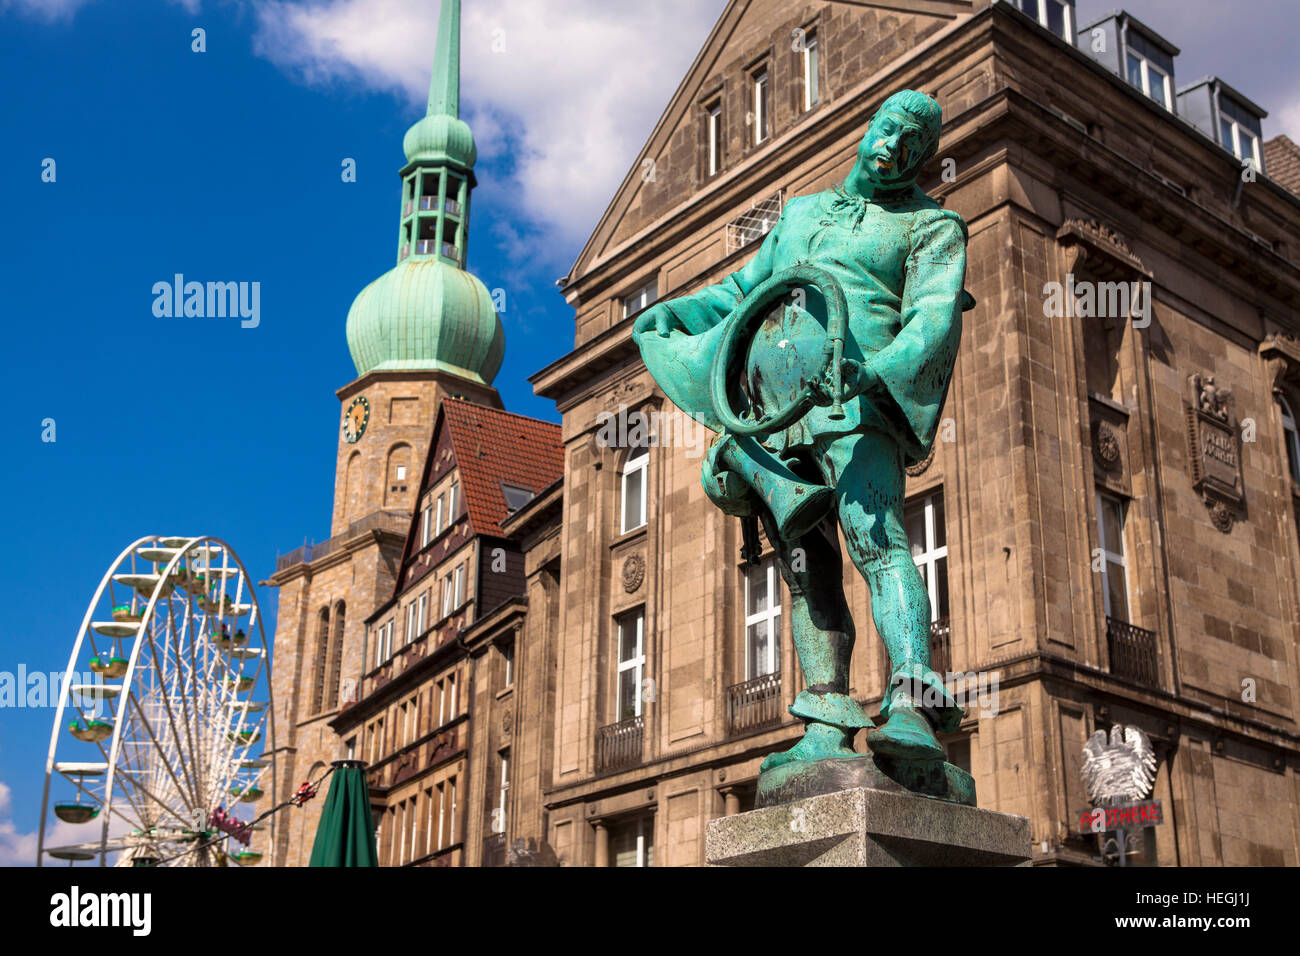 Germany, Ruhr Area, Dortmund, the blower fountain at the old market, in the background a Ferris wheel in front of the Reinoldi church. Stock Photo